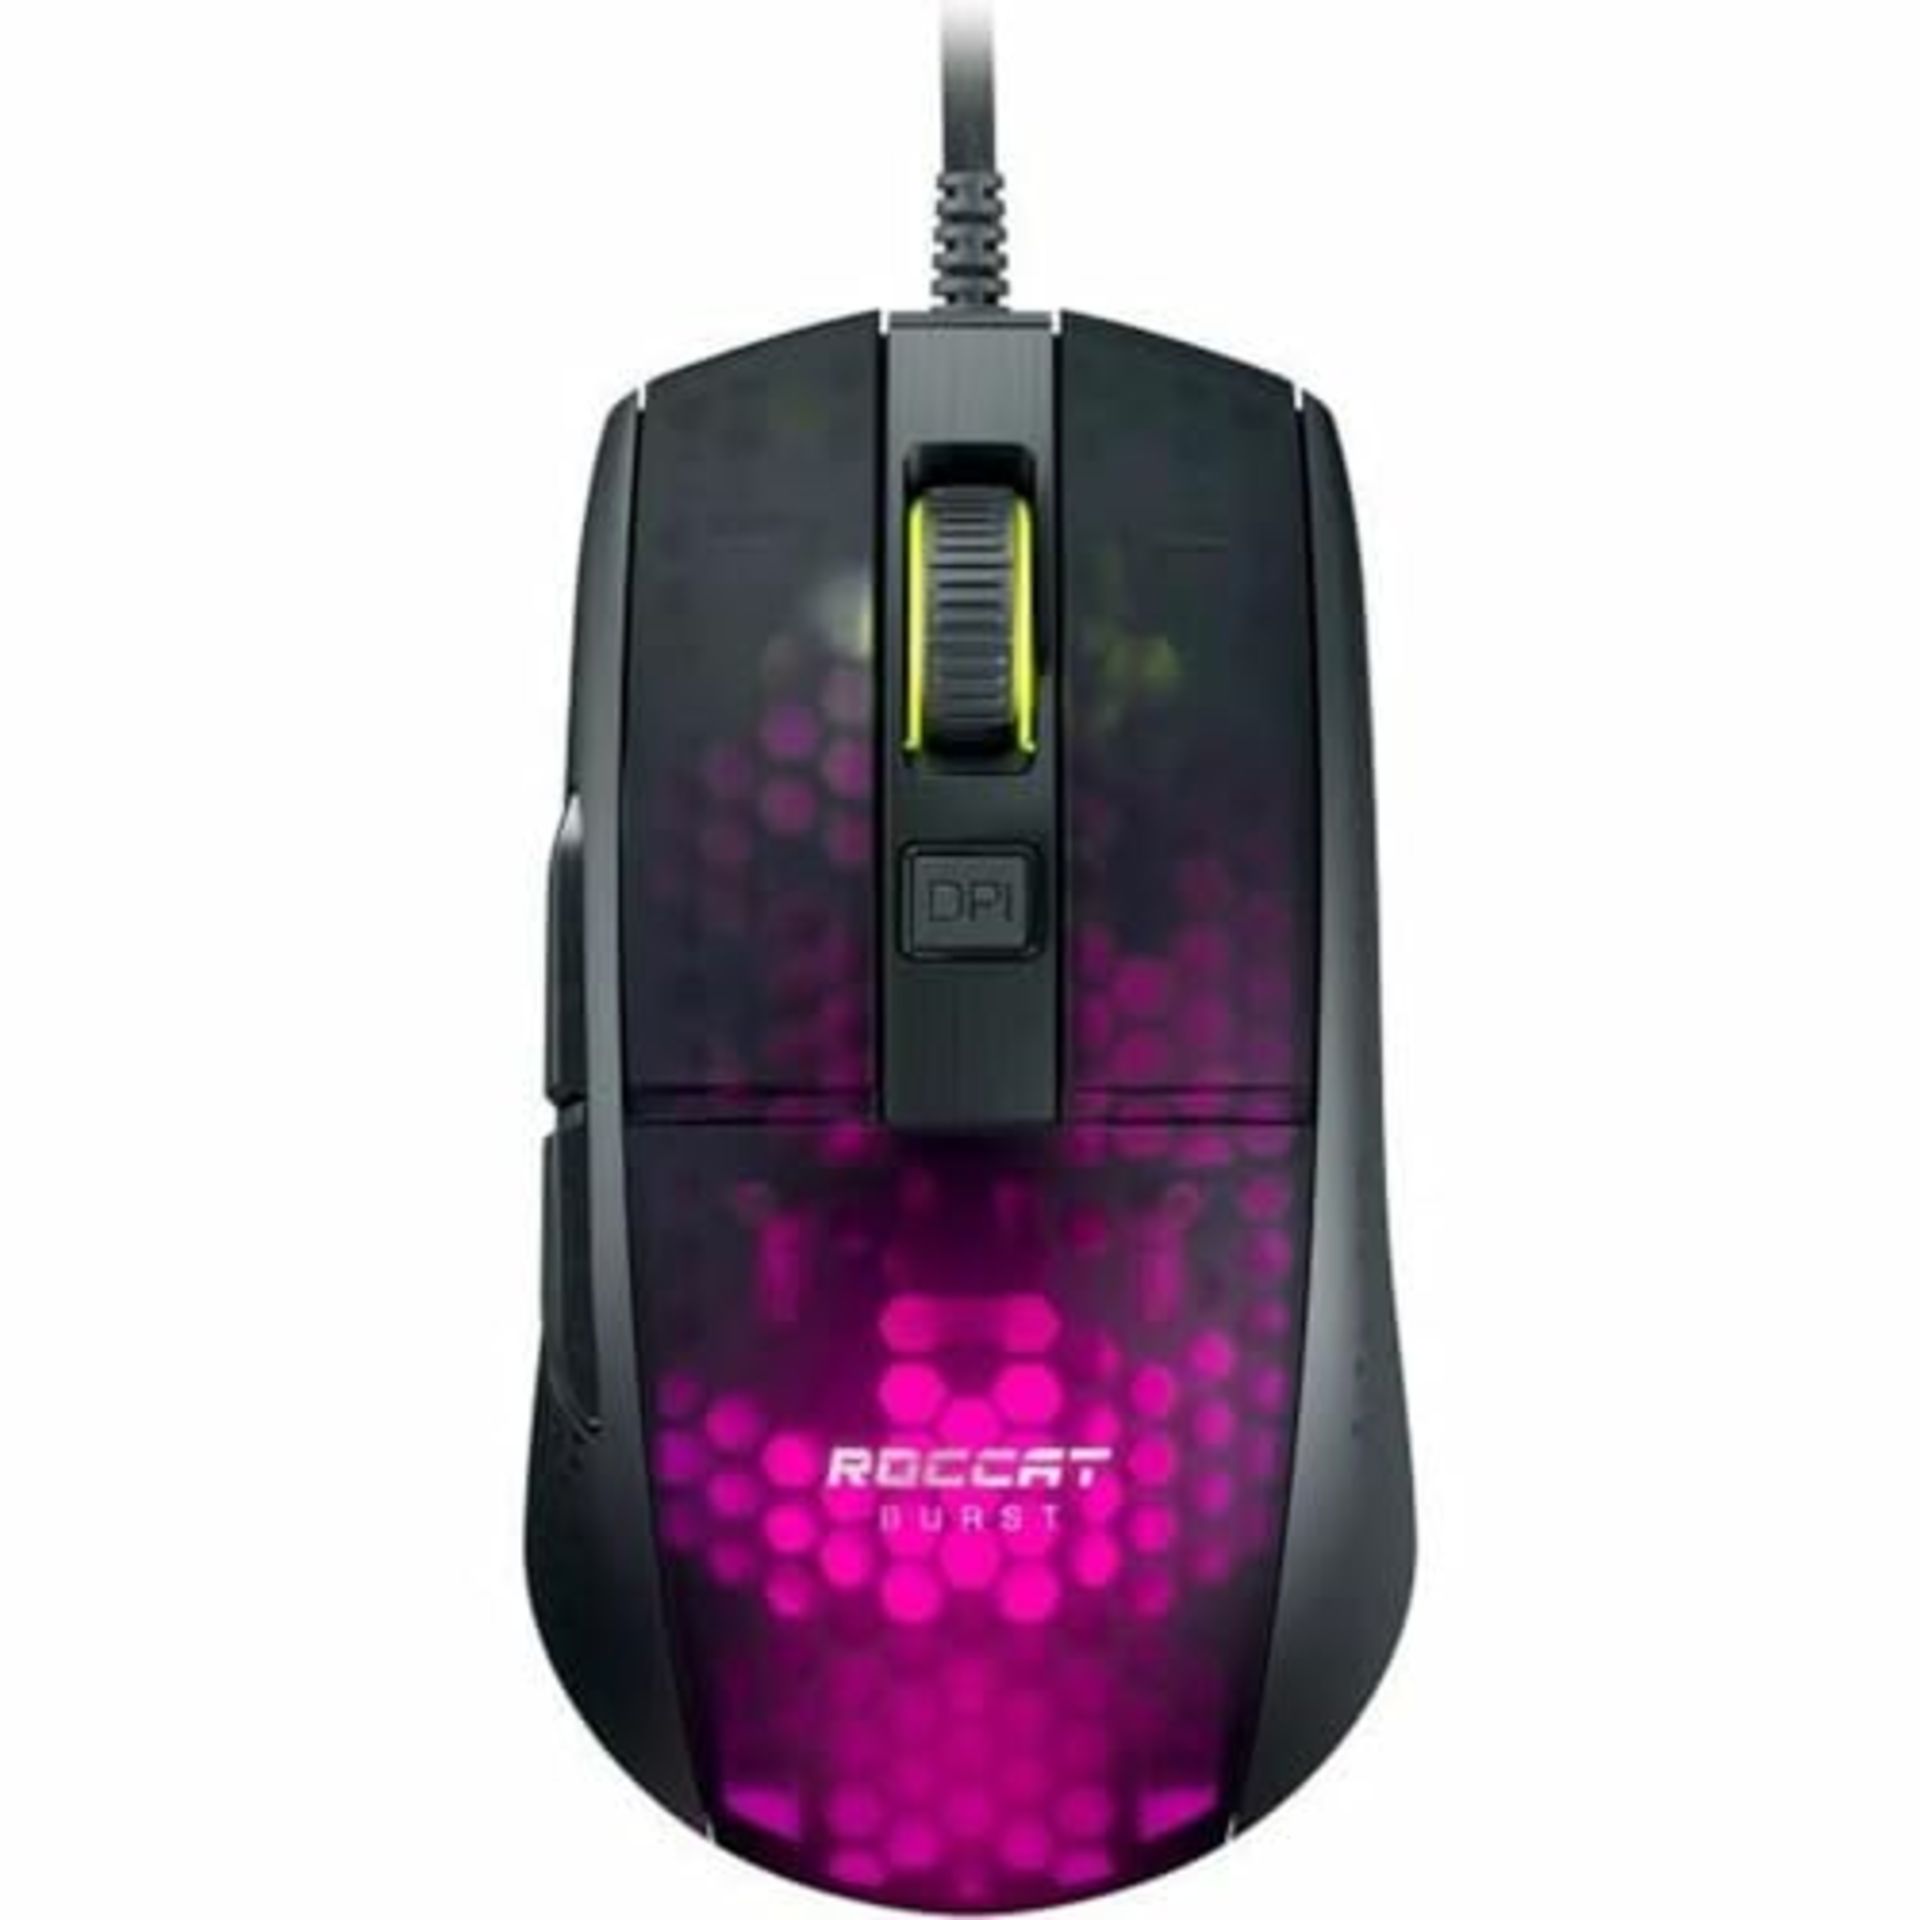 Roccat Burst Pro - Extreme Lightweight Optical Pro Gaming Mouse (high precision, optic